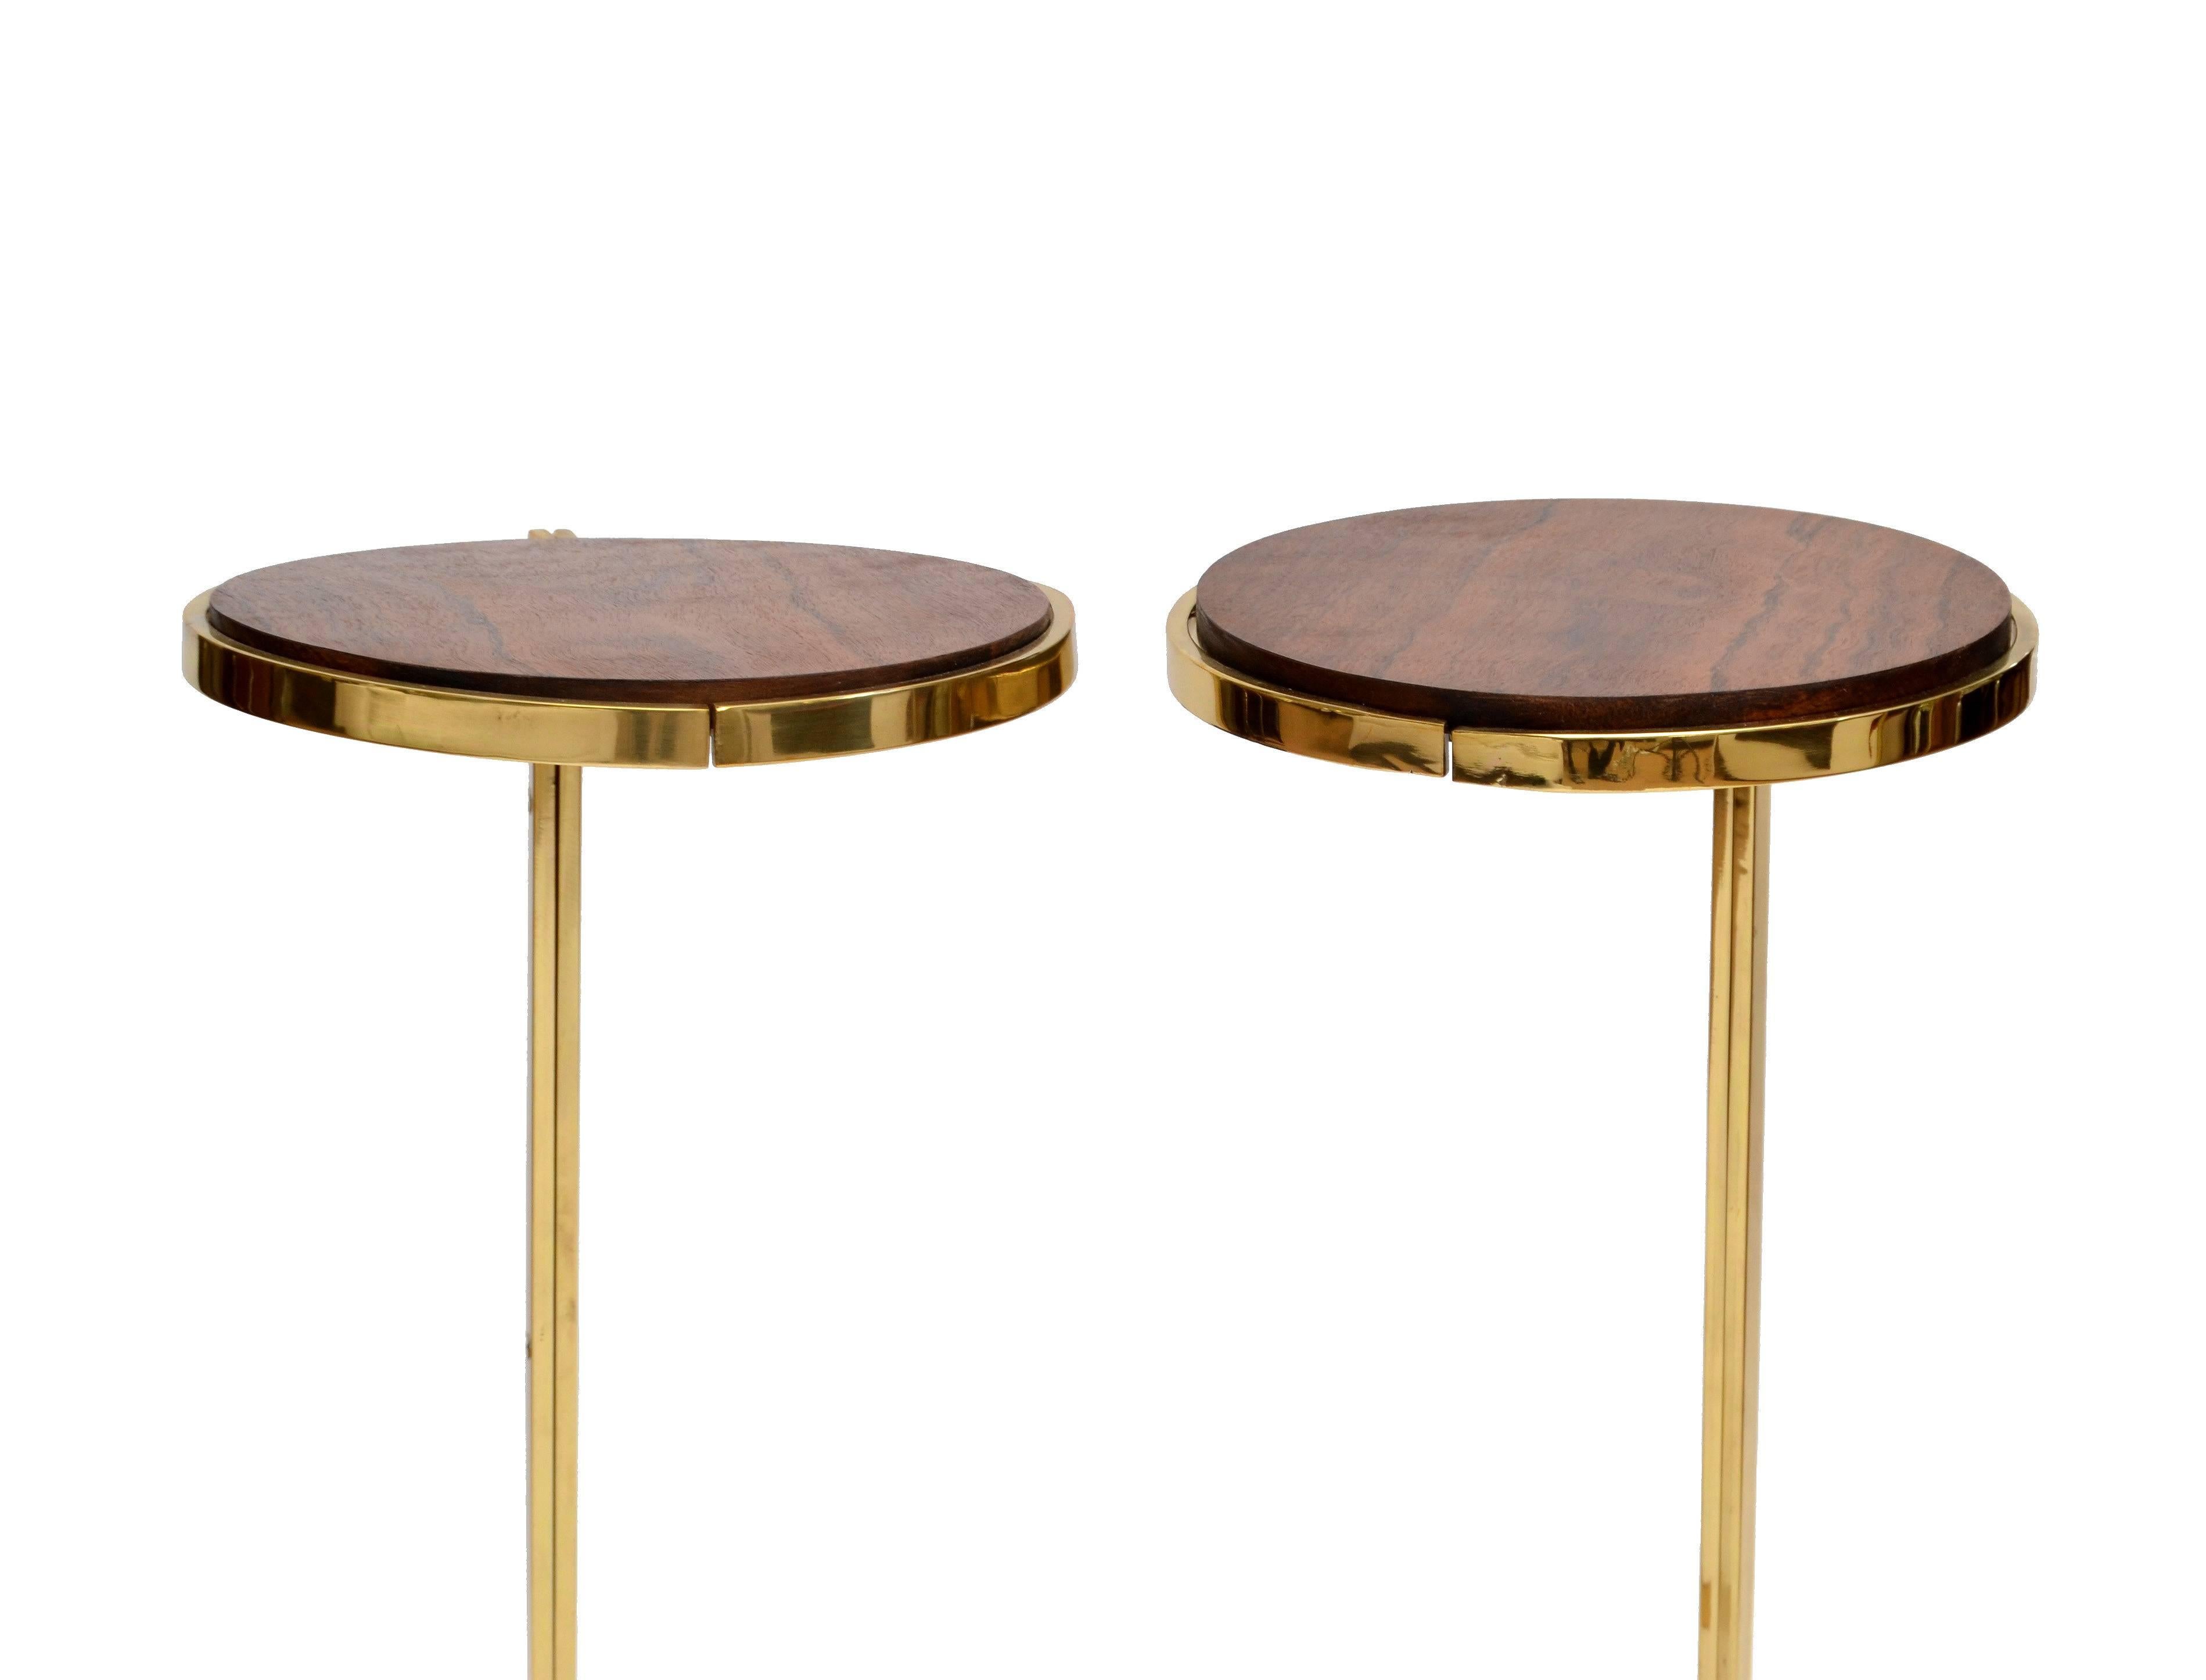 Art Deco Personal Brass with Wooden Top Side Tables 1